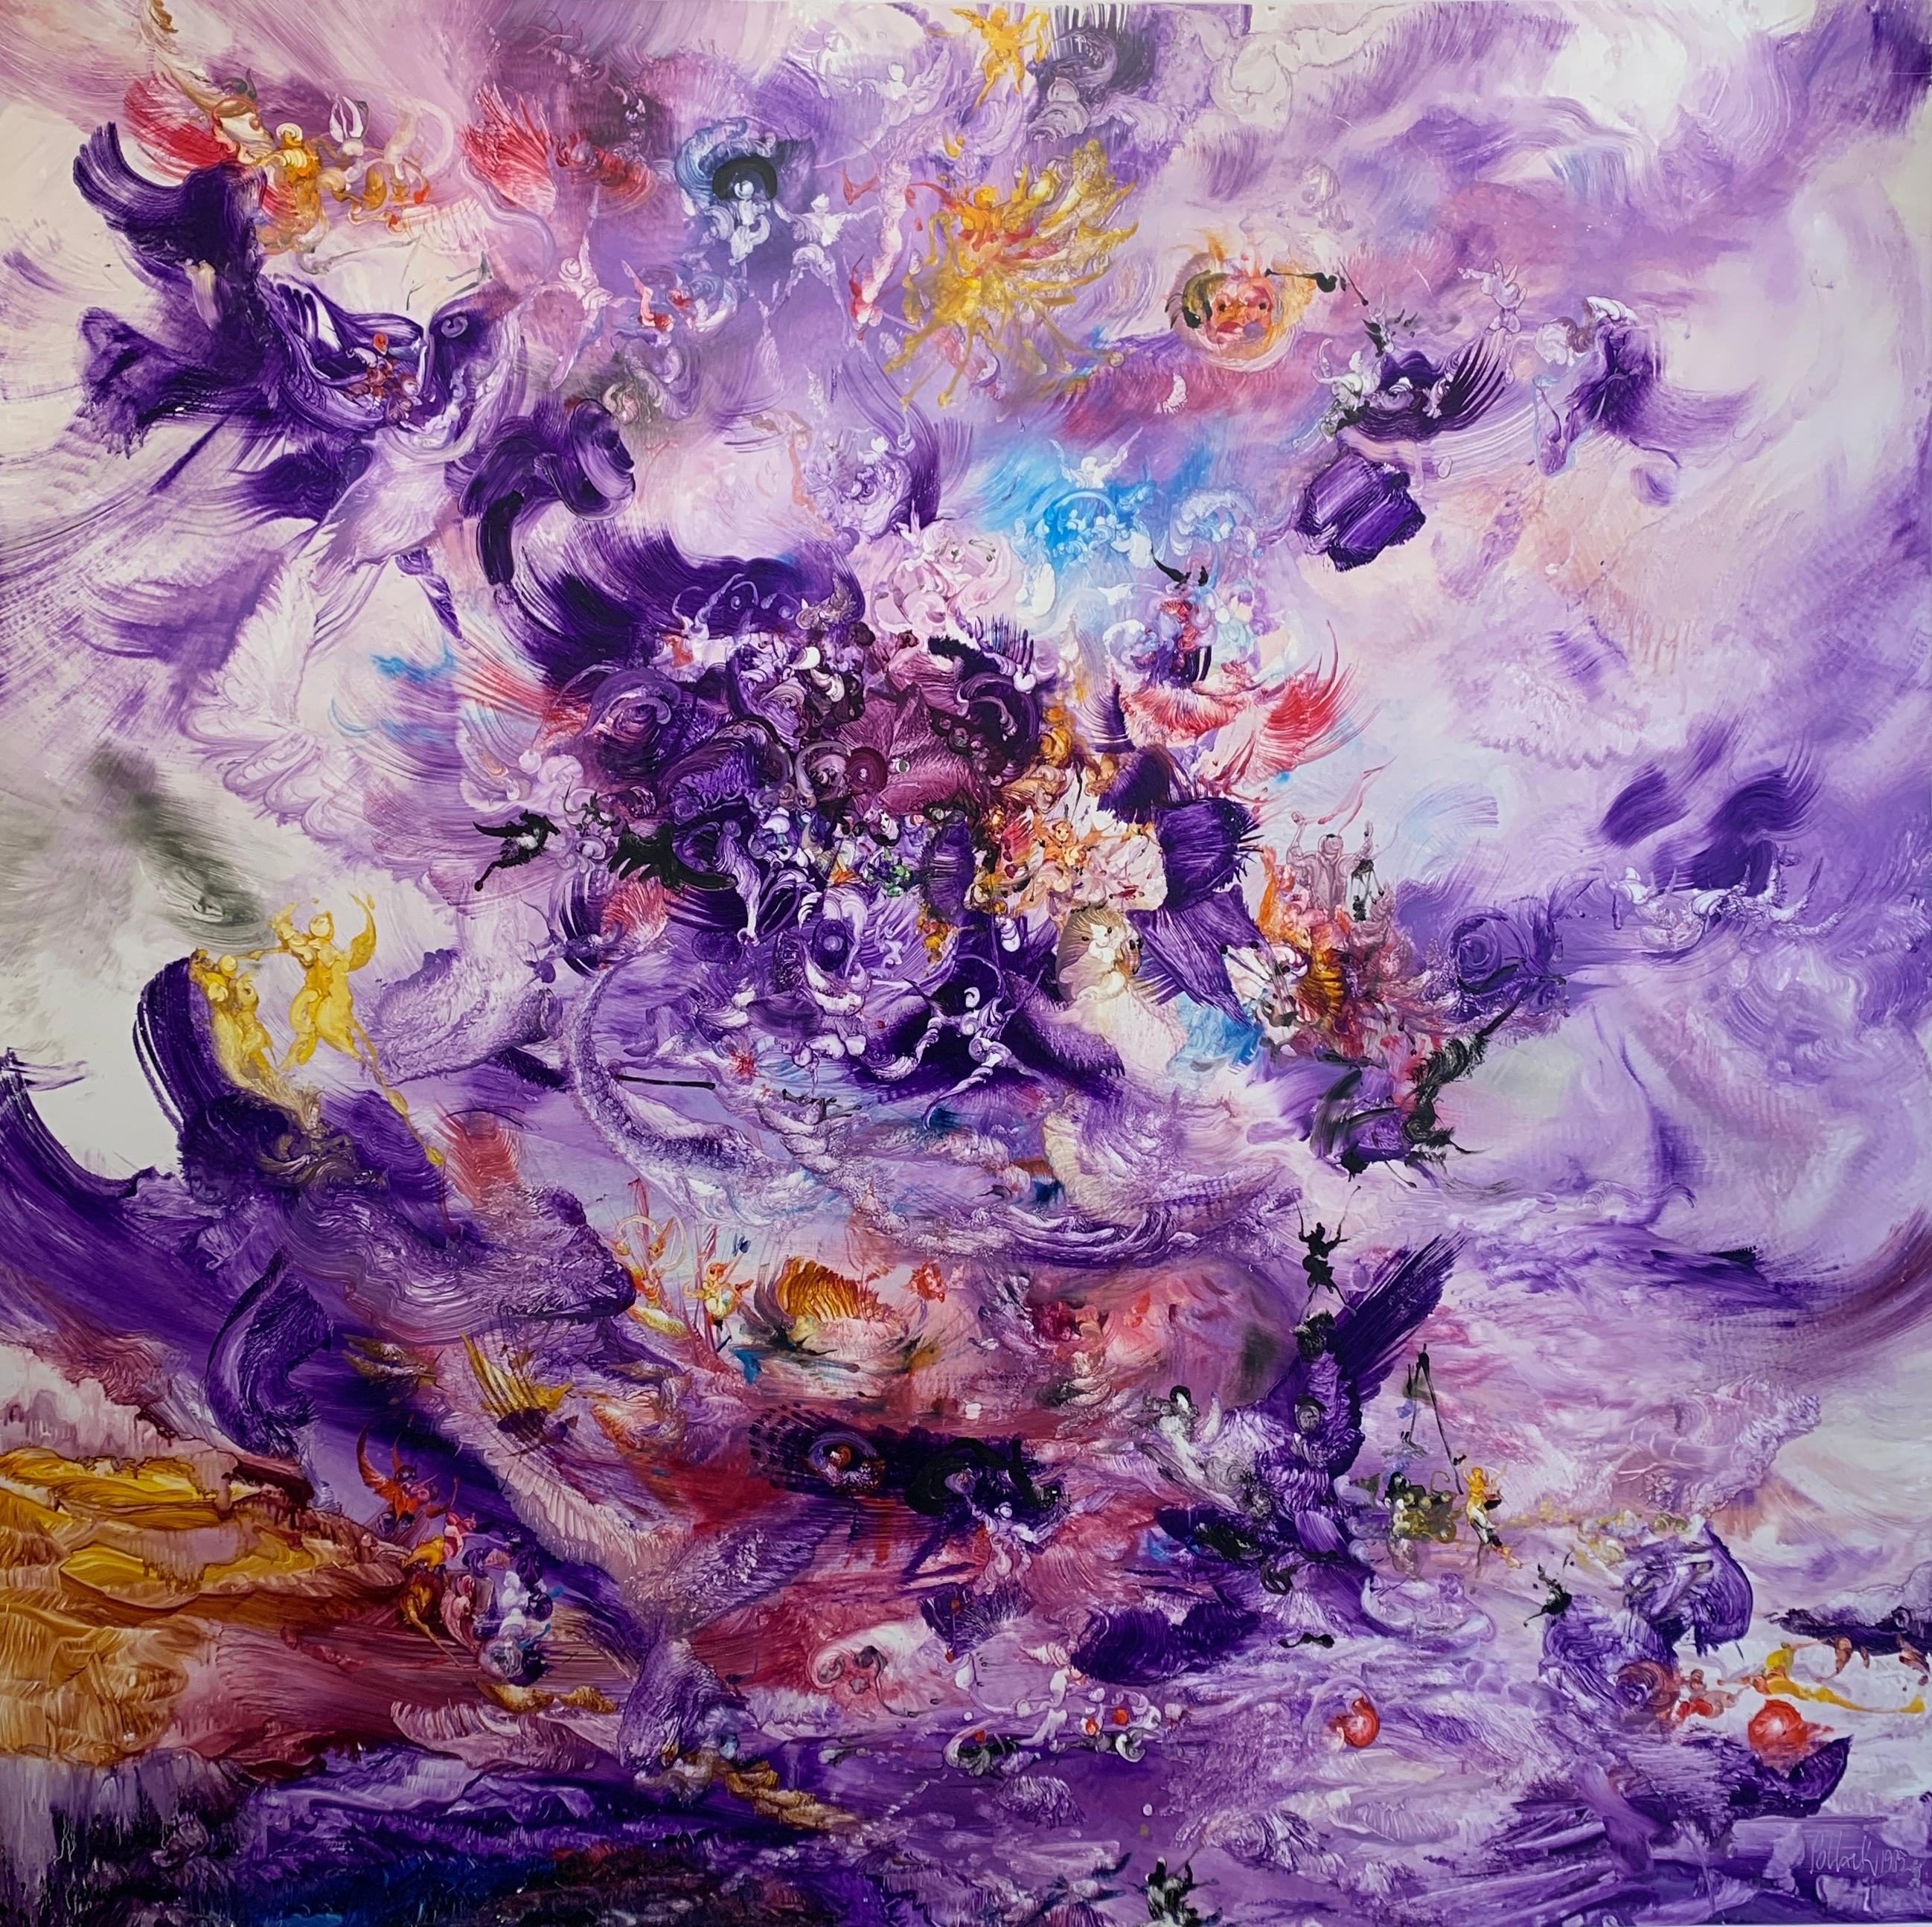 Reginald Pollack "Symphonie Francais" Abstract Oil on Masonite Palm Springs Abstract Expressionist Portrait

Main Colors: Multicolor Purple Pink Yellow

Oil on Masonite painting by late American Artist Reginald Pollack.  It has a 1/4" to 3/8" white